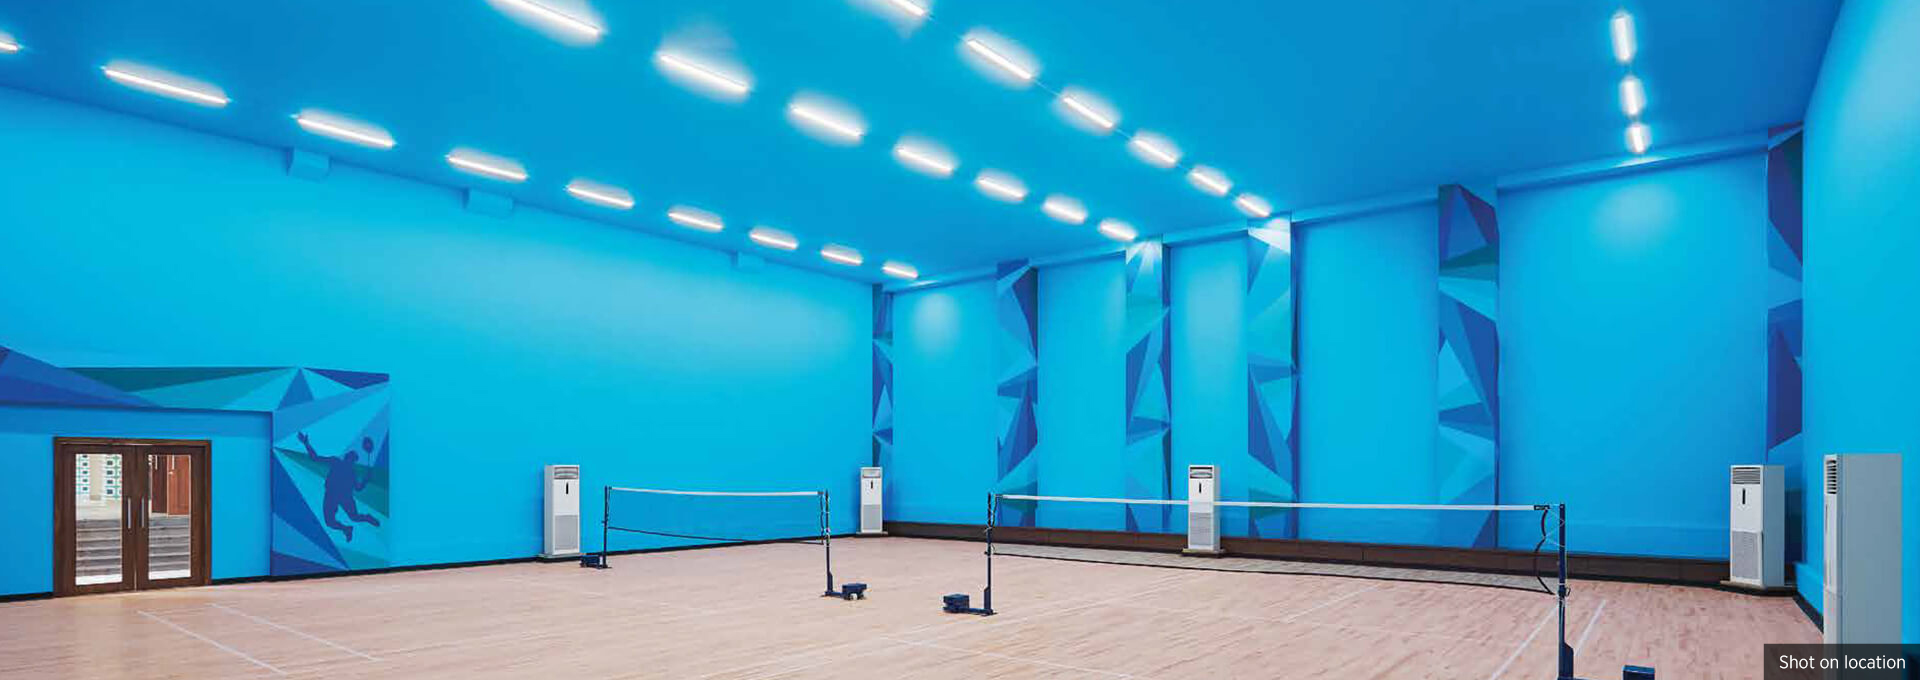 Badminton Courts At The Clubhouse